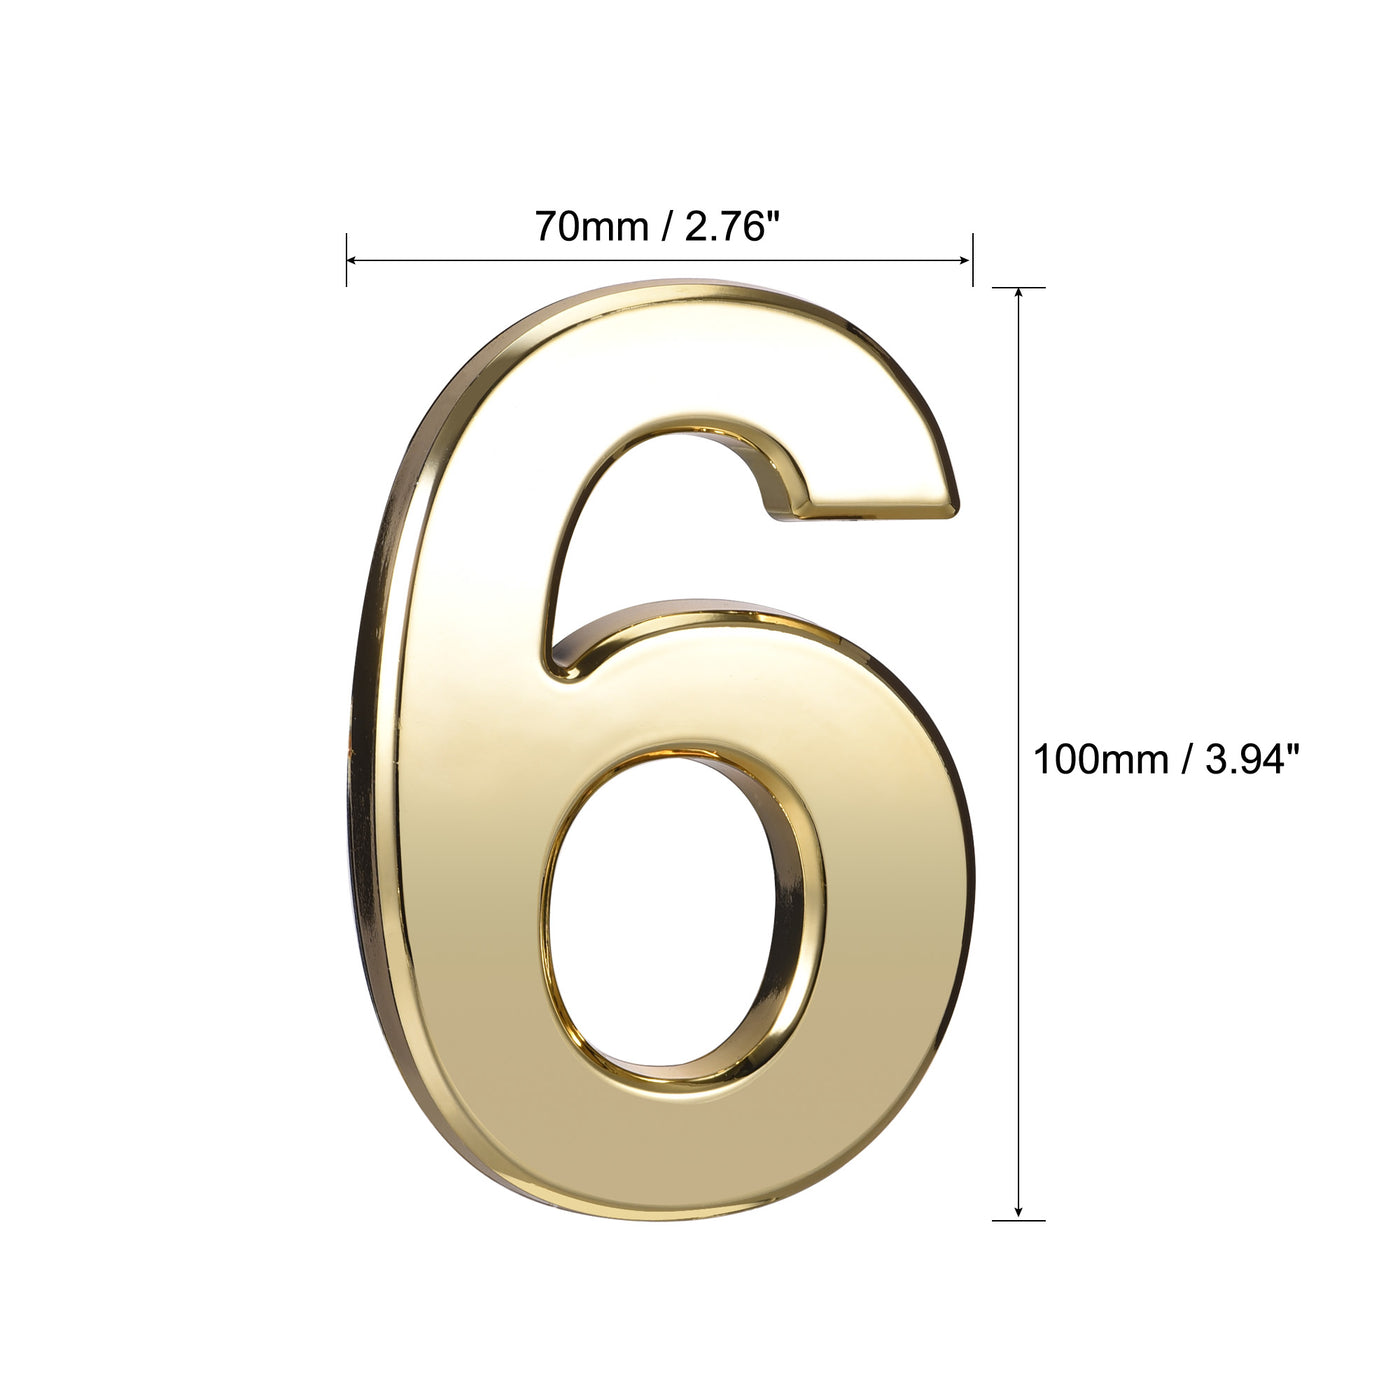 Uxcell Uxcell Self Adhesive House Number, 3.94 Inch ABS Plastic Number 8 for House Hotel Mailbox Address Sign Gold Tone 2 Pcs